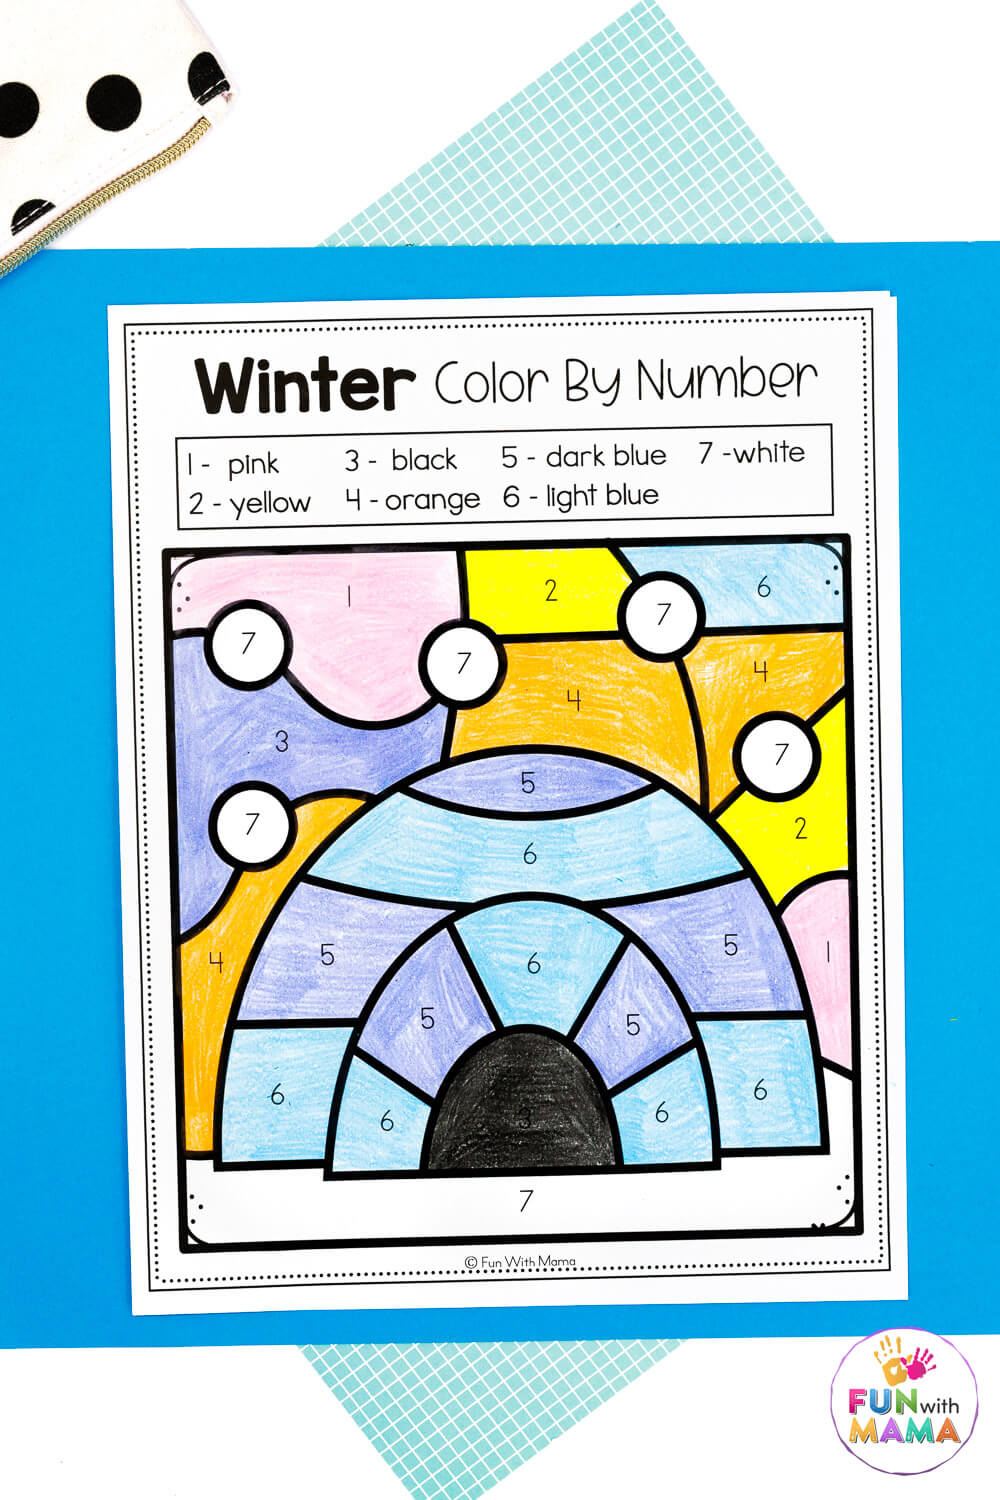 igloo-color-by-number-winter-color-by-number-free-printable-kids